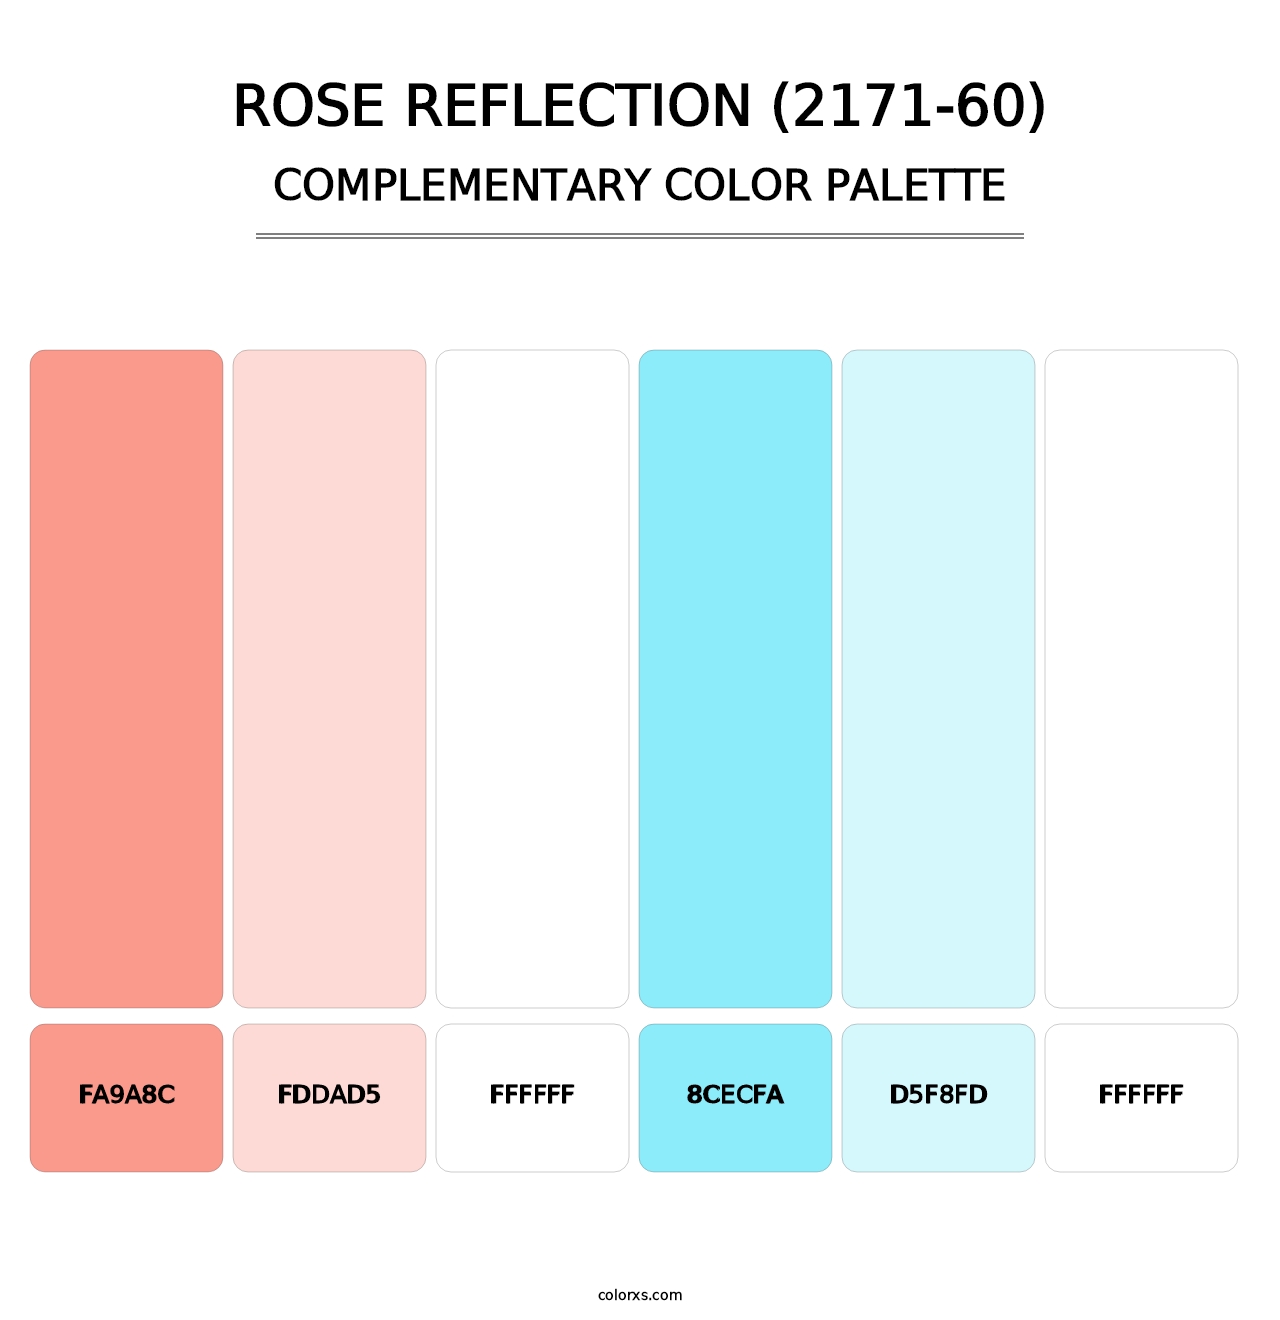 Rose Reflection (2171-60) - Complementary Color Palette